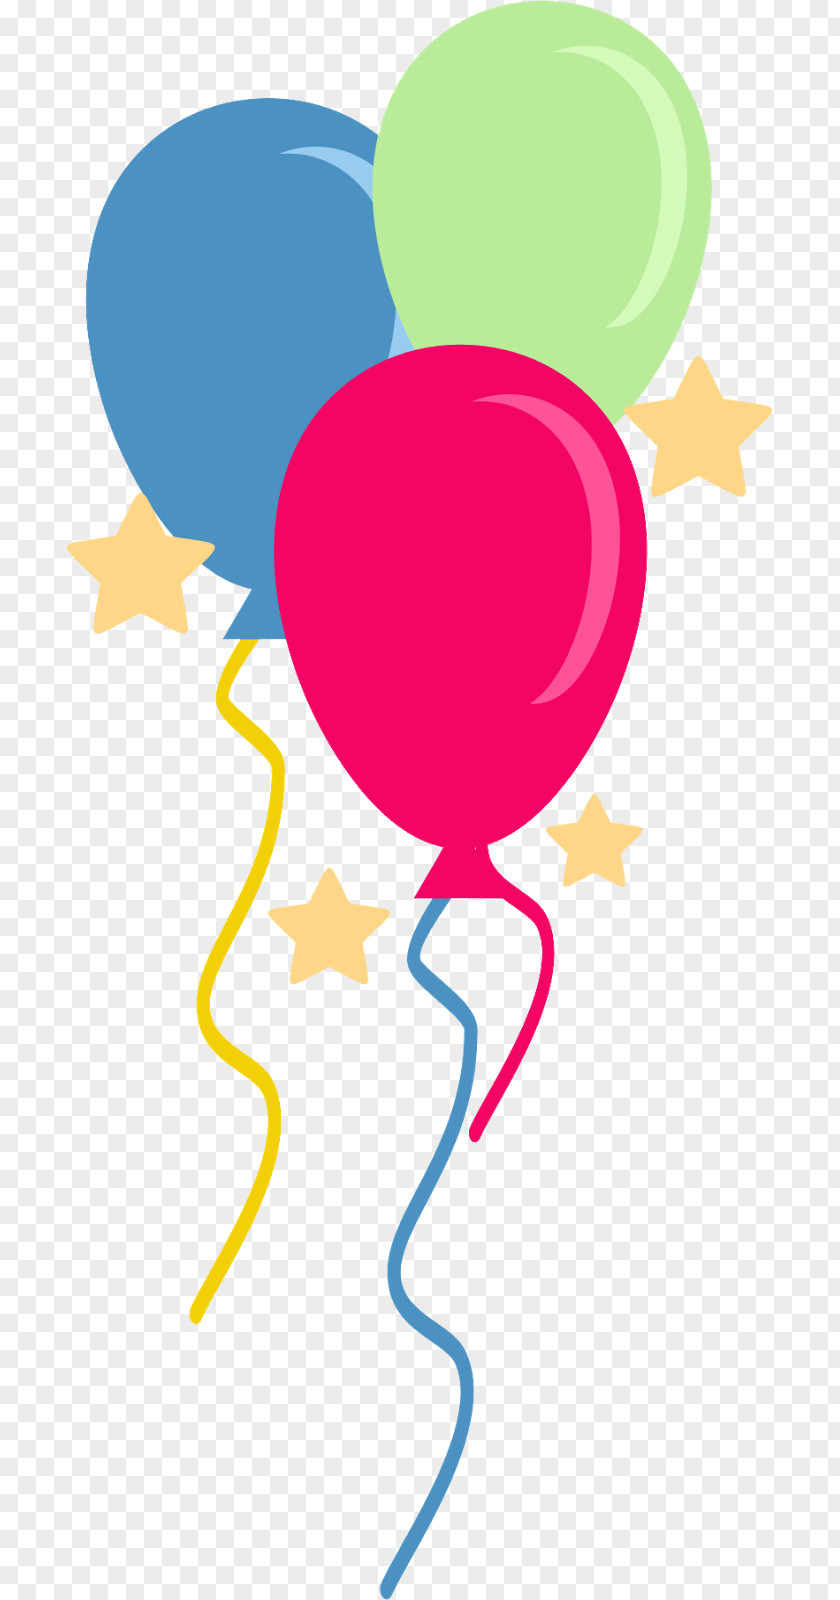 Balloon Graphic Design Pink M Clip Art PNG